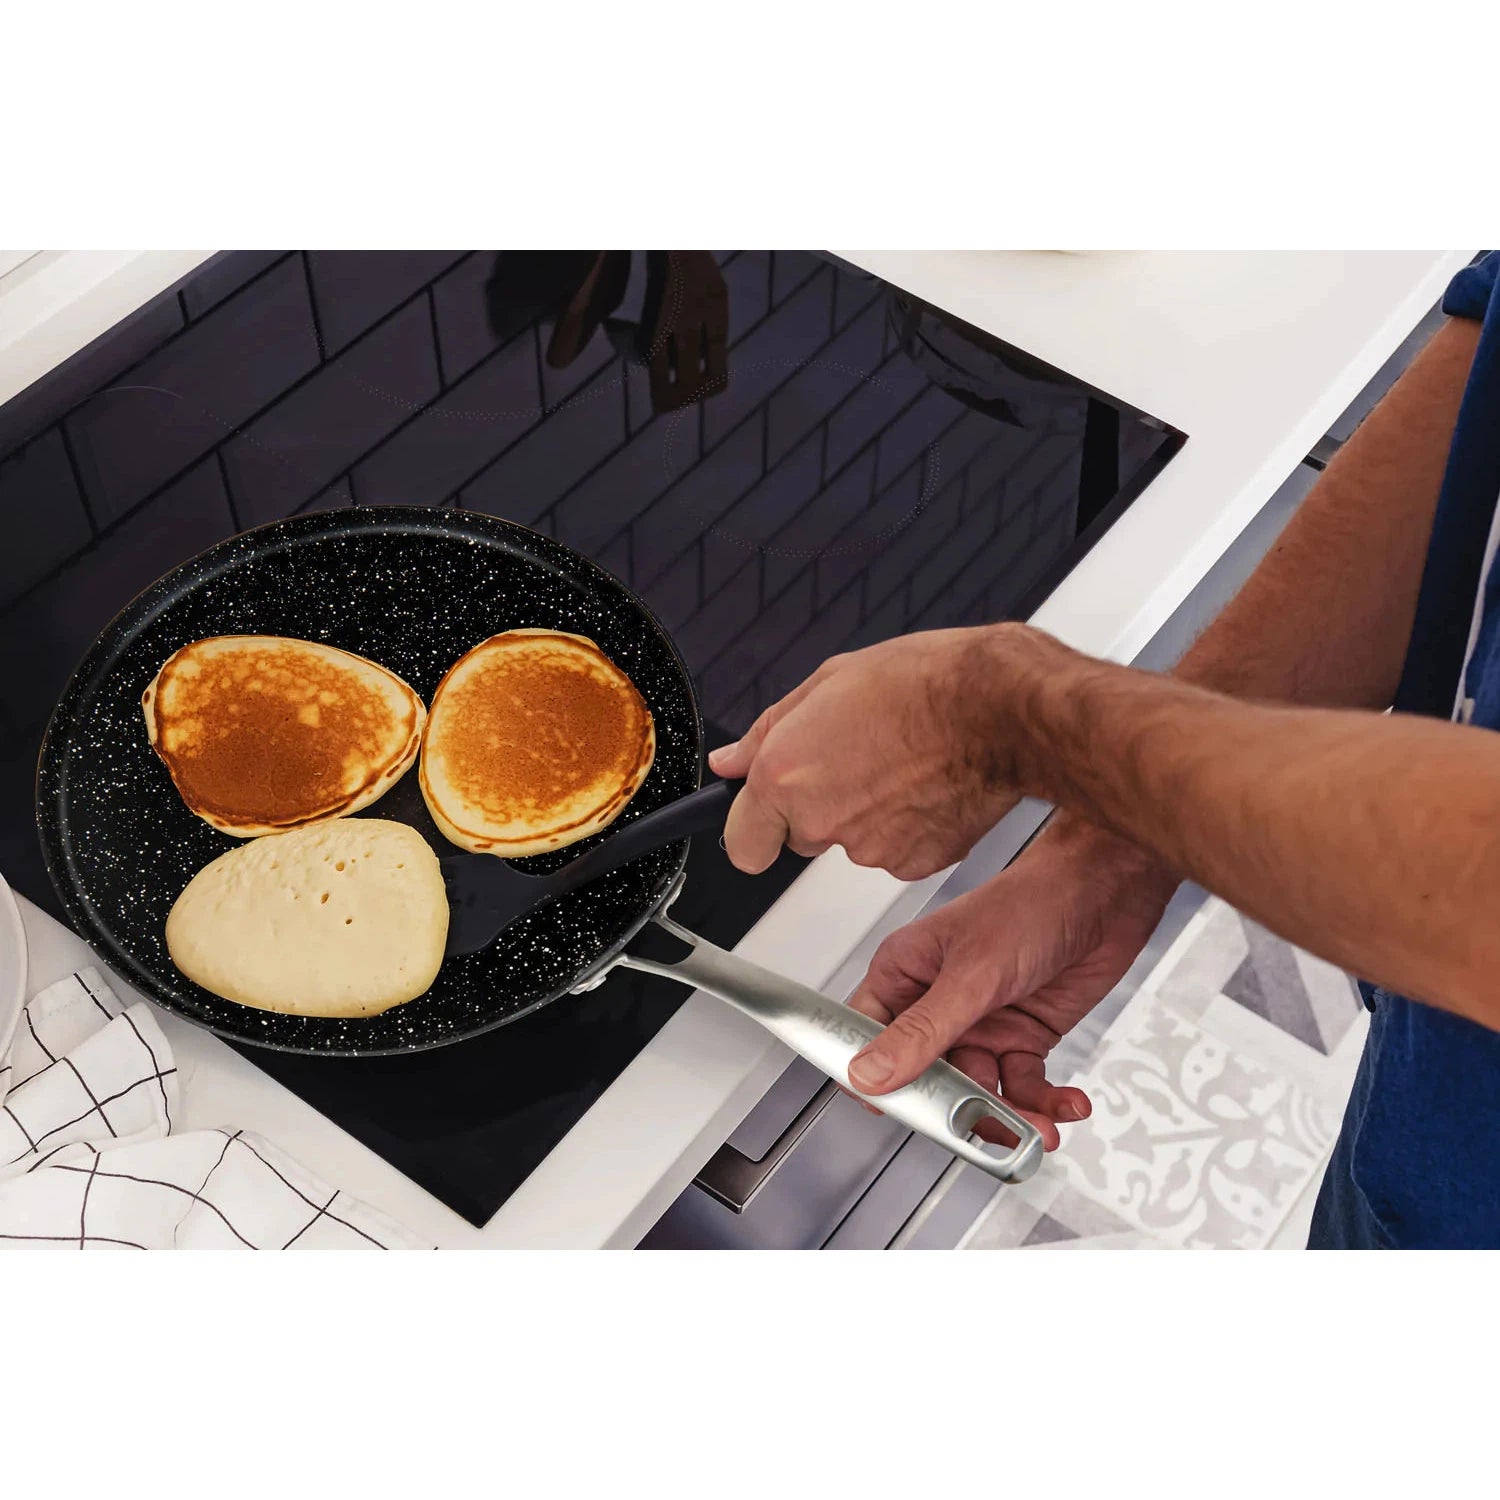 MASTERPAN Innovative Series 11” Crepe Pan, Non-stick Aluminum Cookware With Stainless Steel Riveted Handle